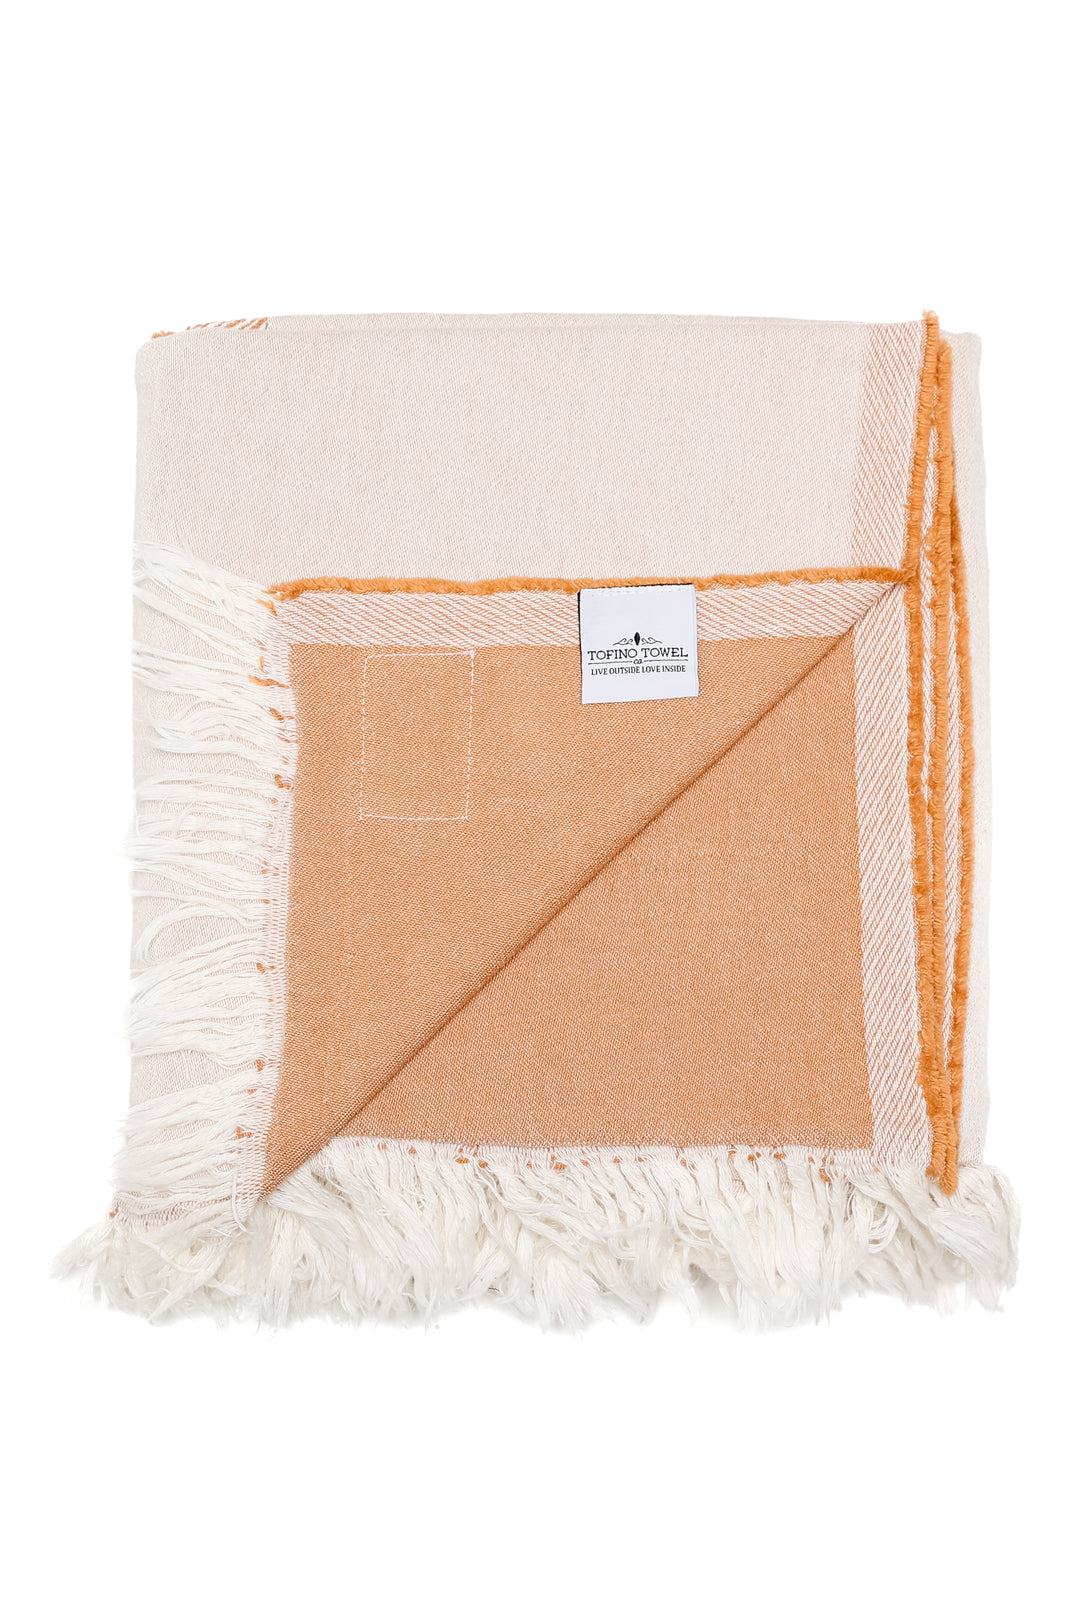 LEO BOUTIQUE The Brook Throw Oat TOFINO OAT